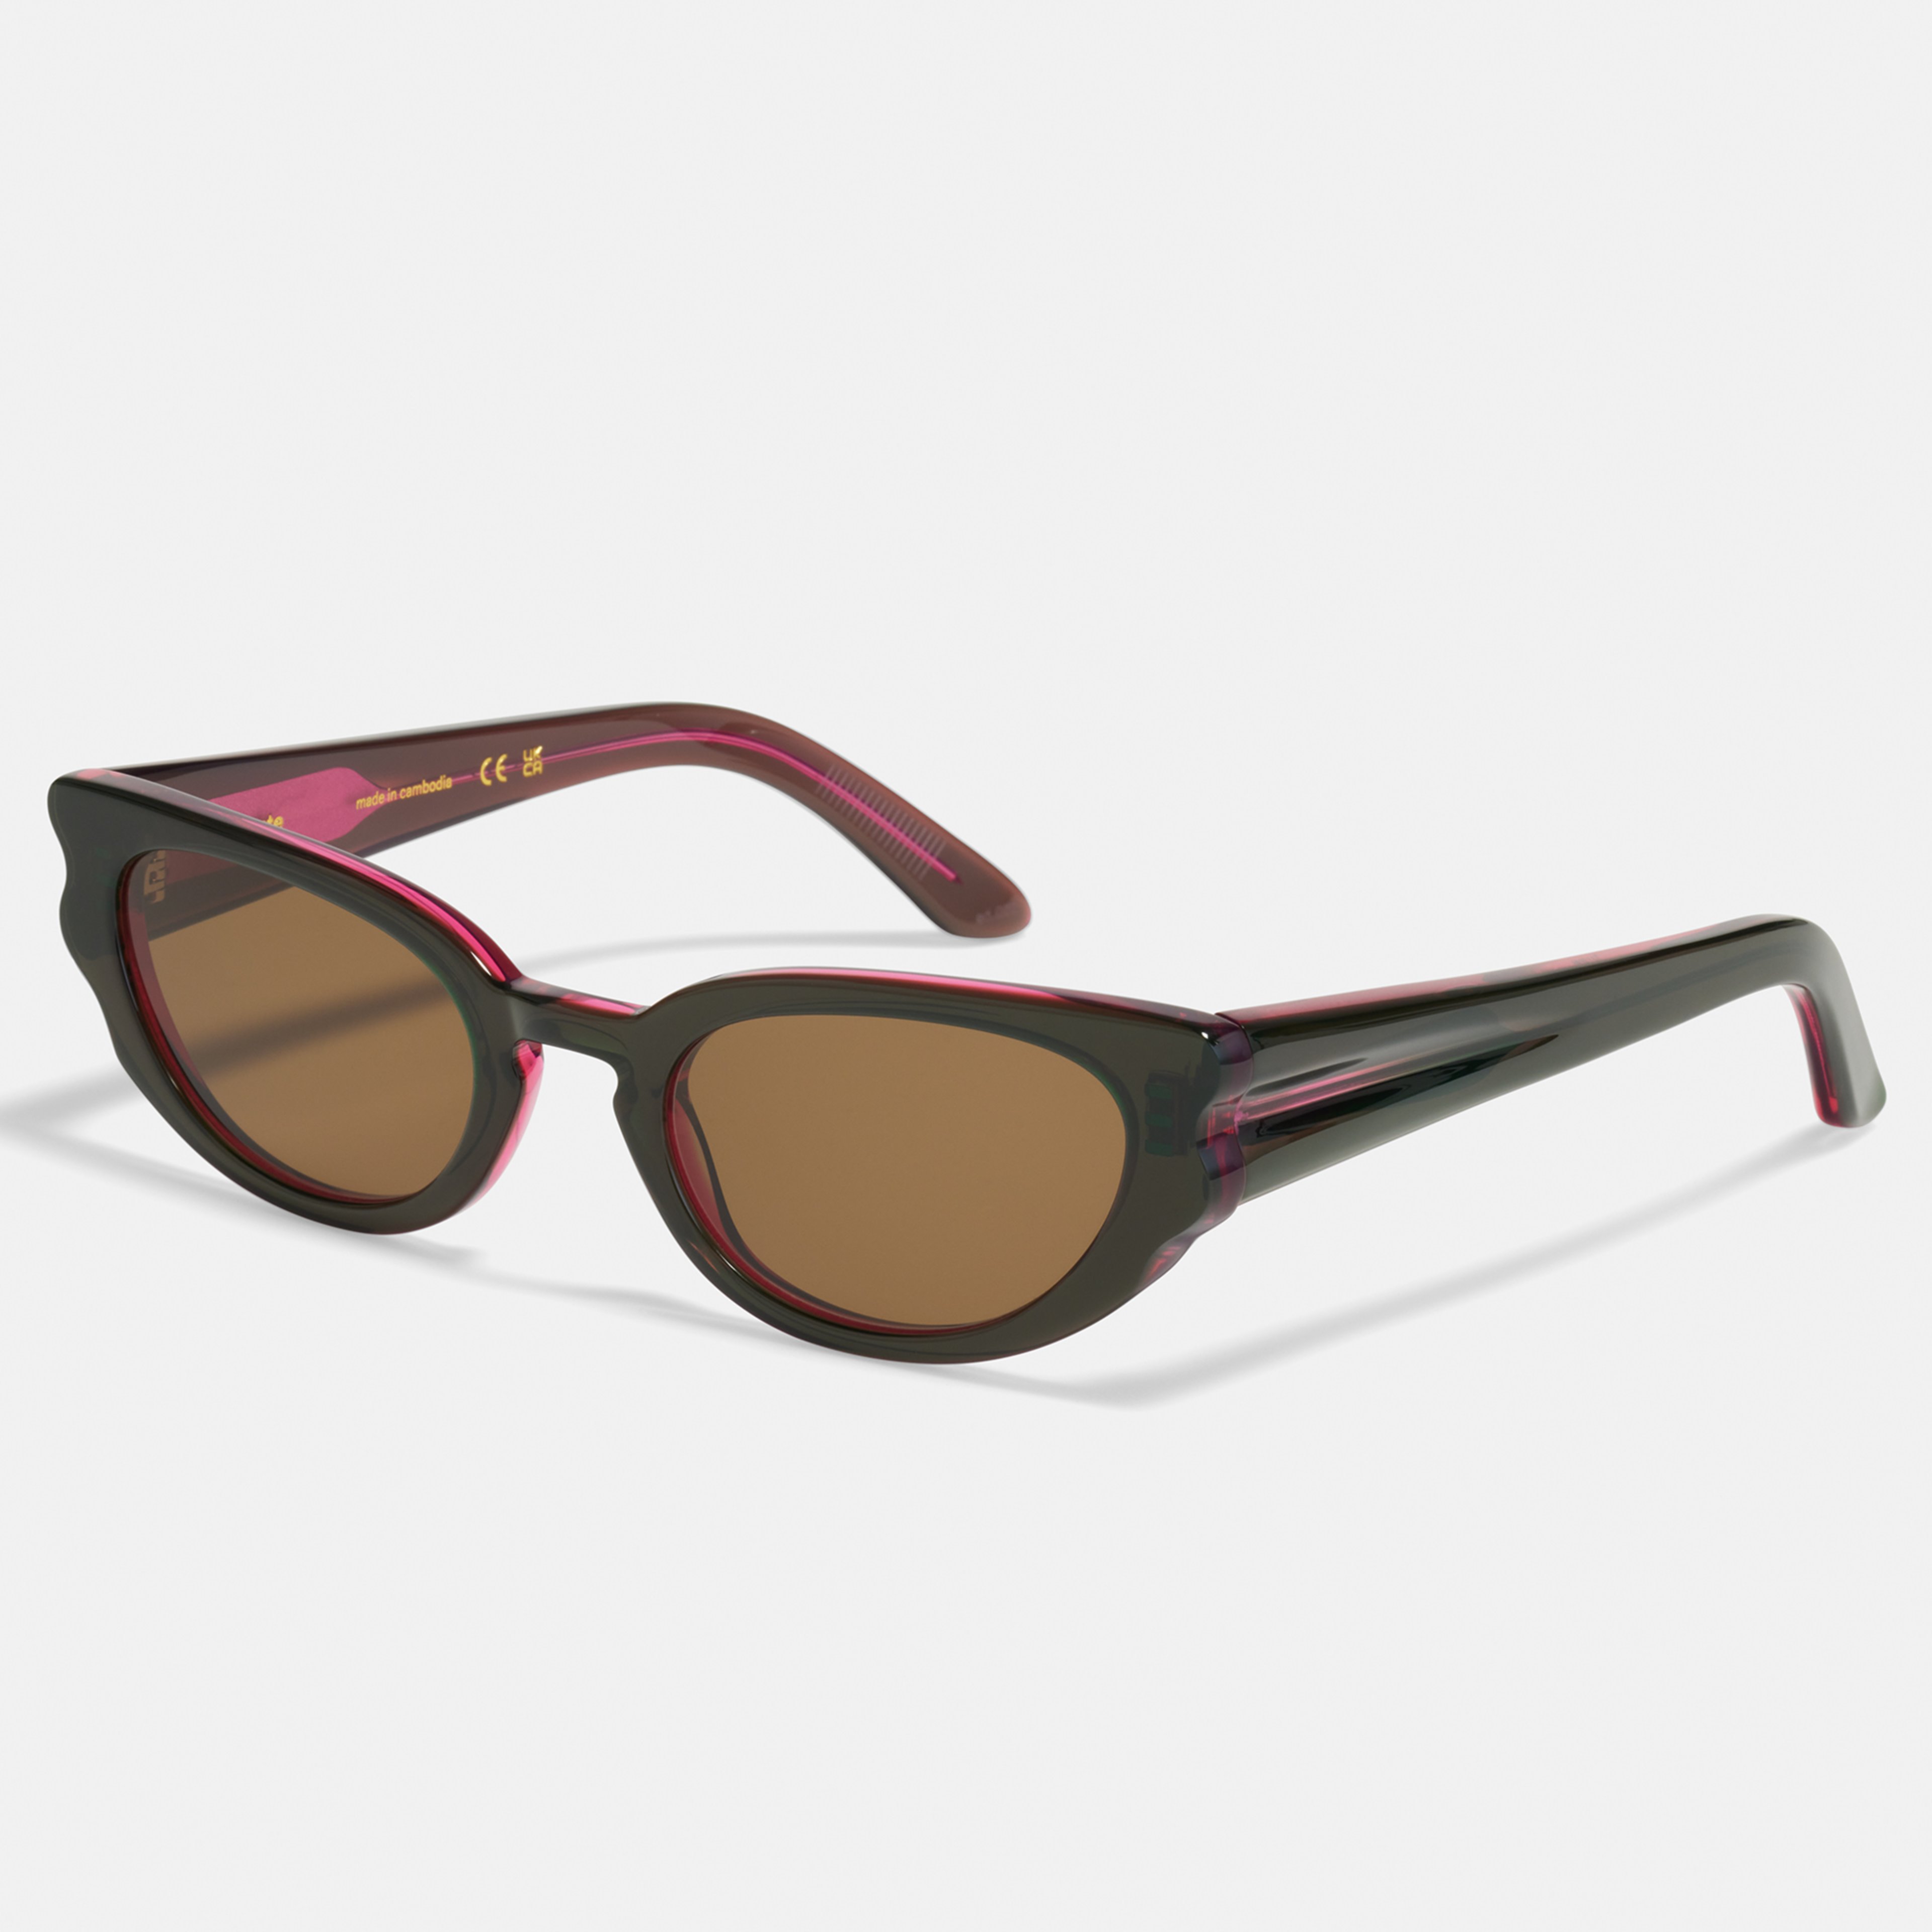 Ace & Tate Solaires | oval Renew bio-acétate in Vert, Rose